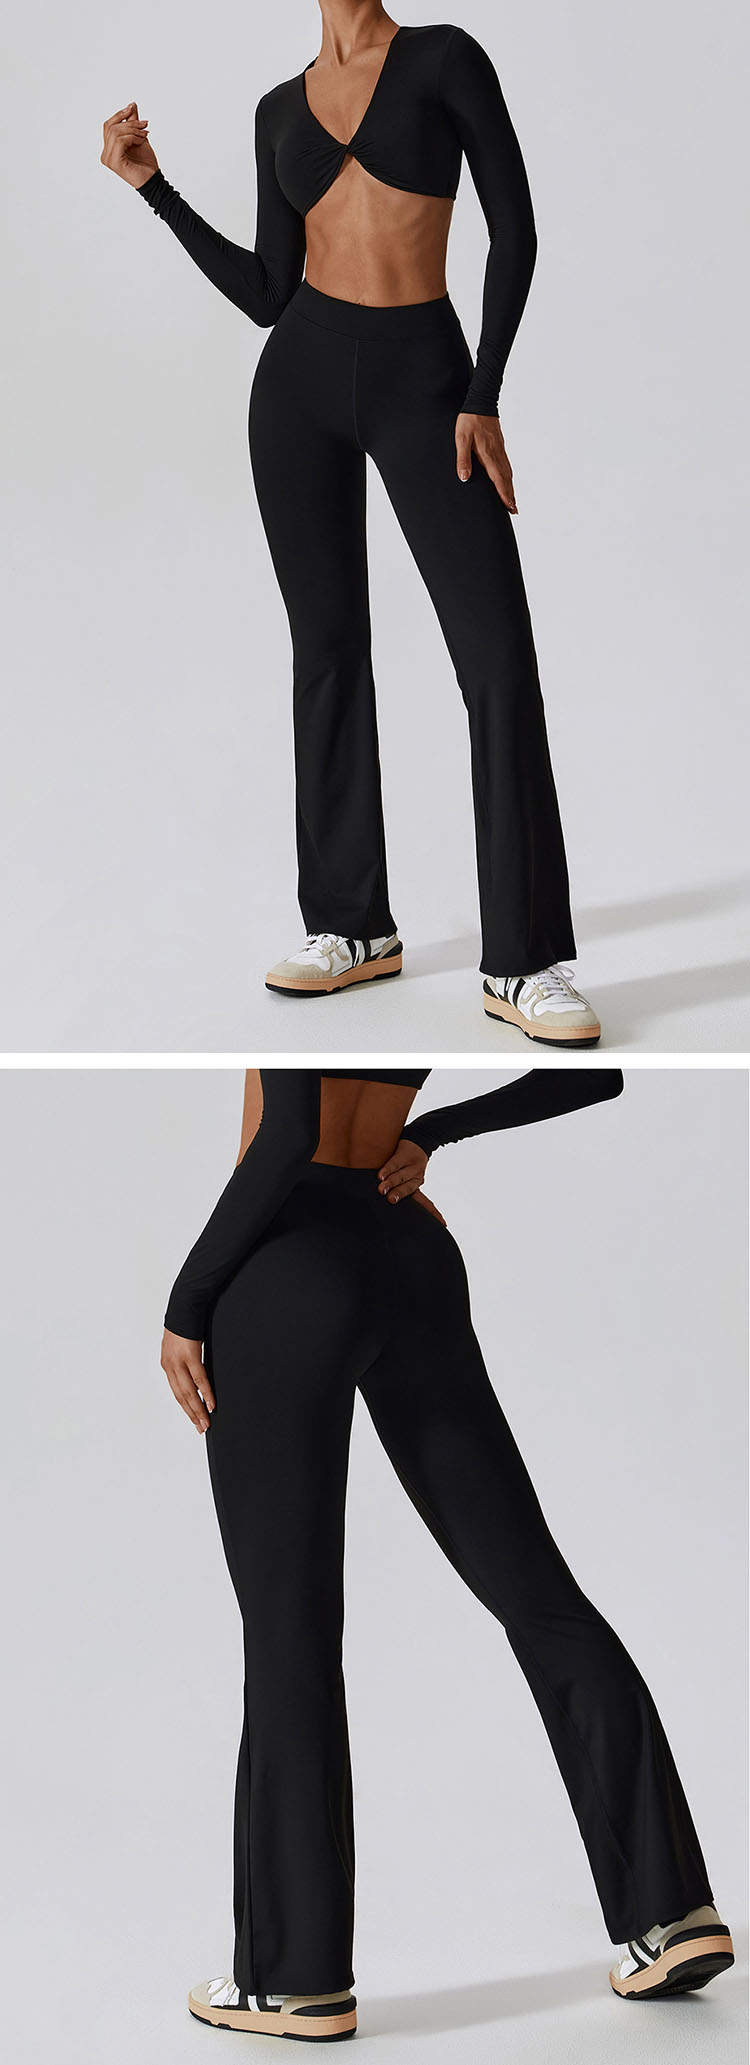 slim flared trousers are the perfect choic